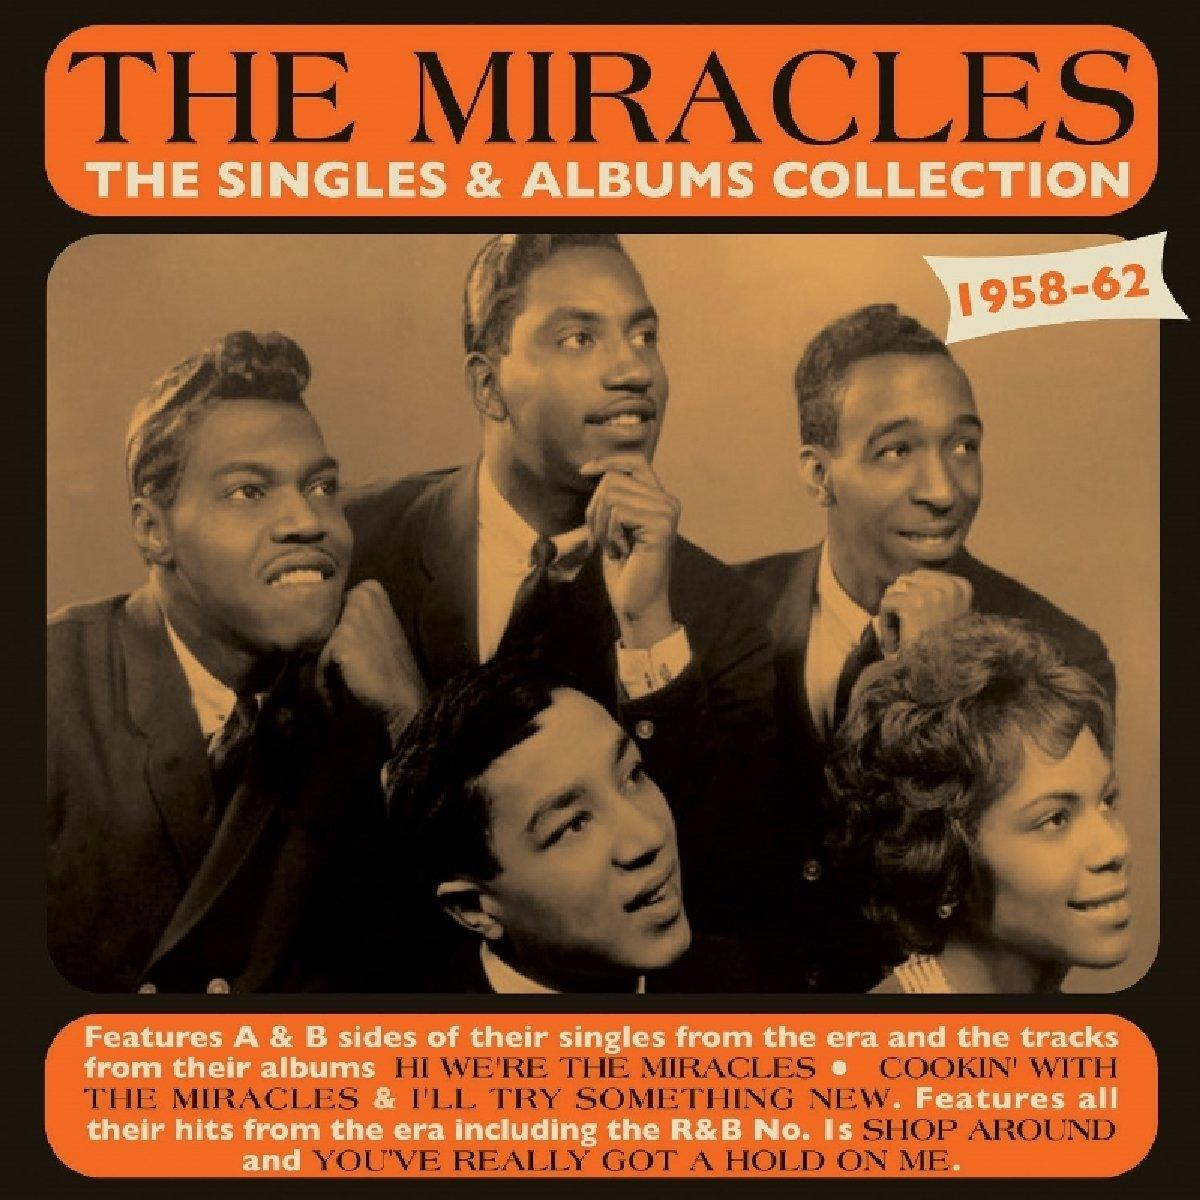 The - The & (CD) Miracles - - Albums Miracles 1958-1662 Collection: The Singles